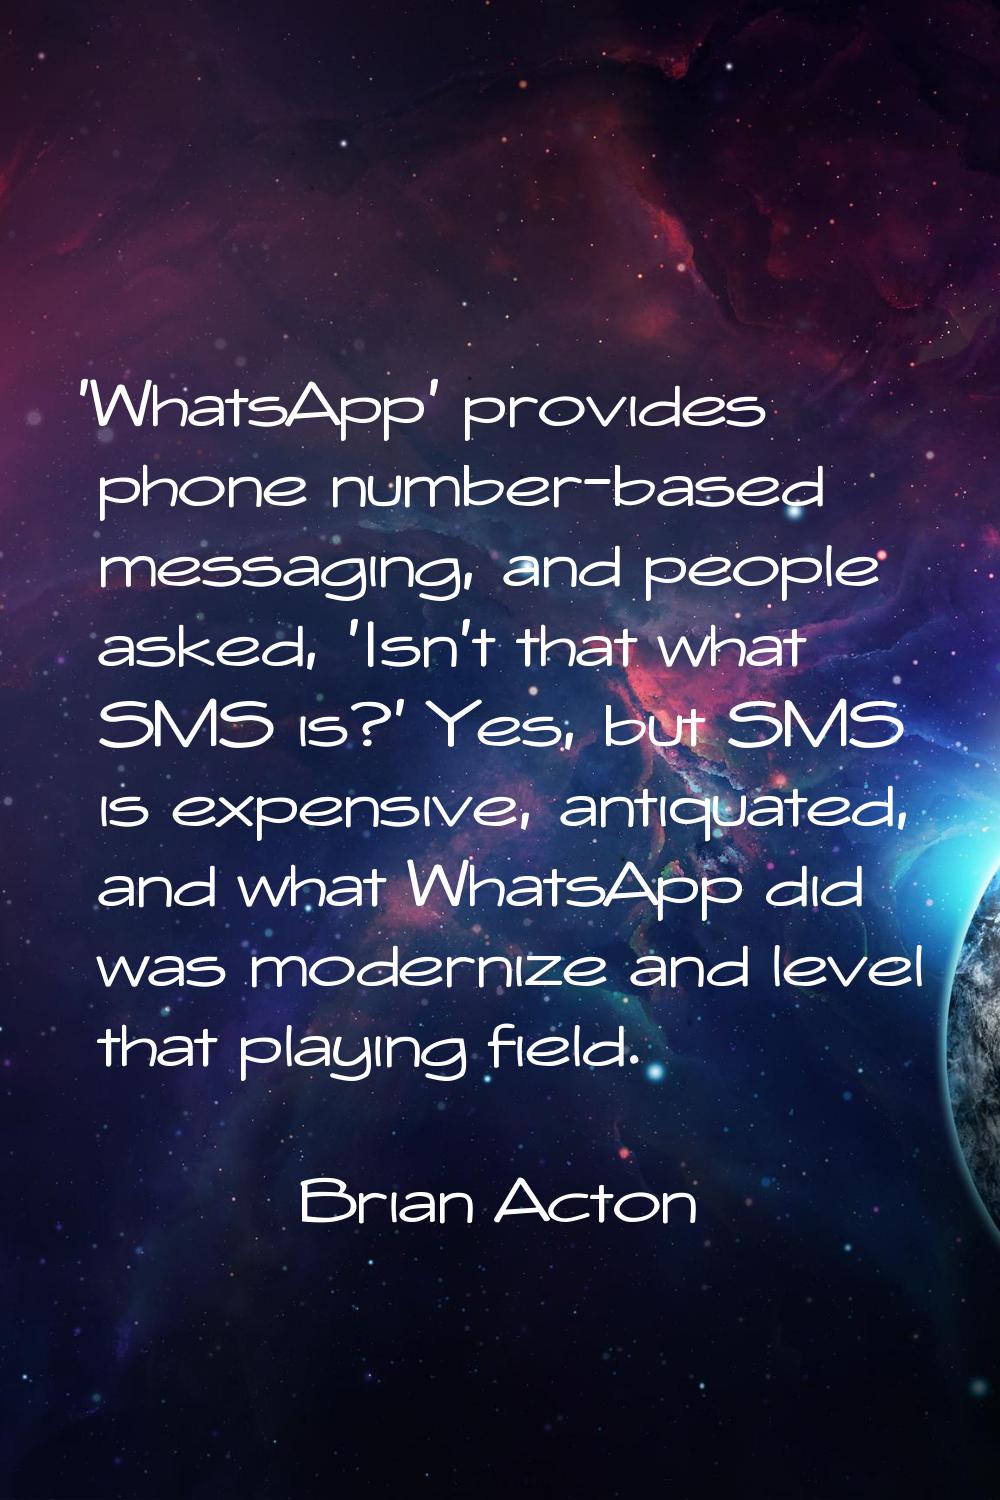 'WhatsApp' provides phone number-based messaging, and people asked, 'Isn't that what SMS is?' Yes, 